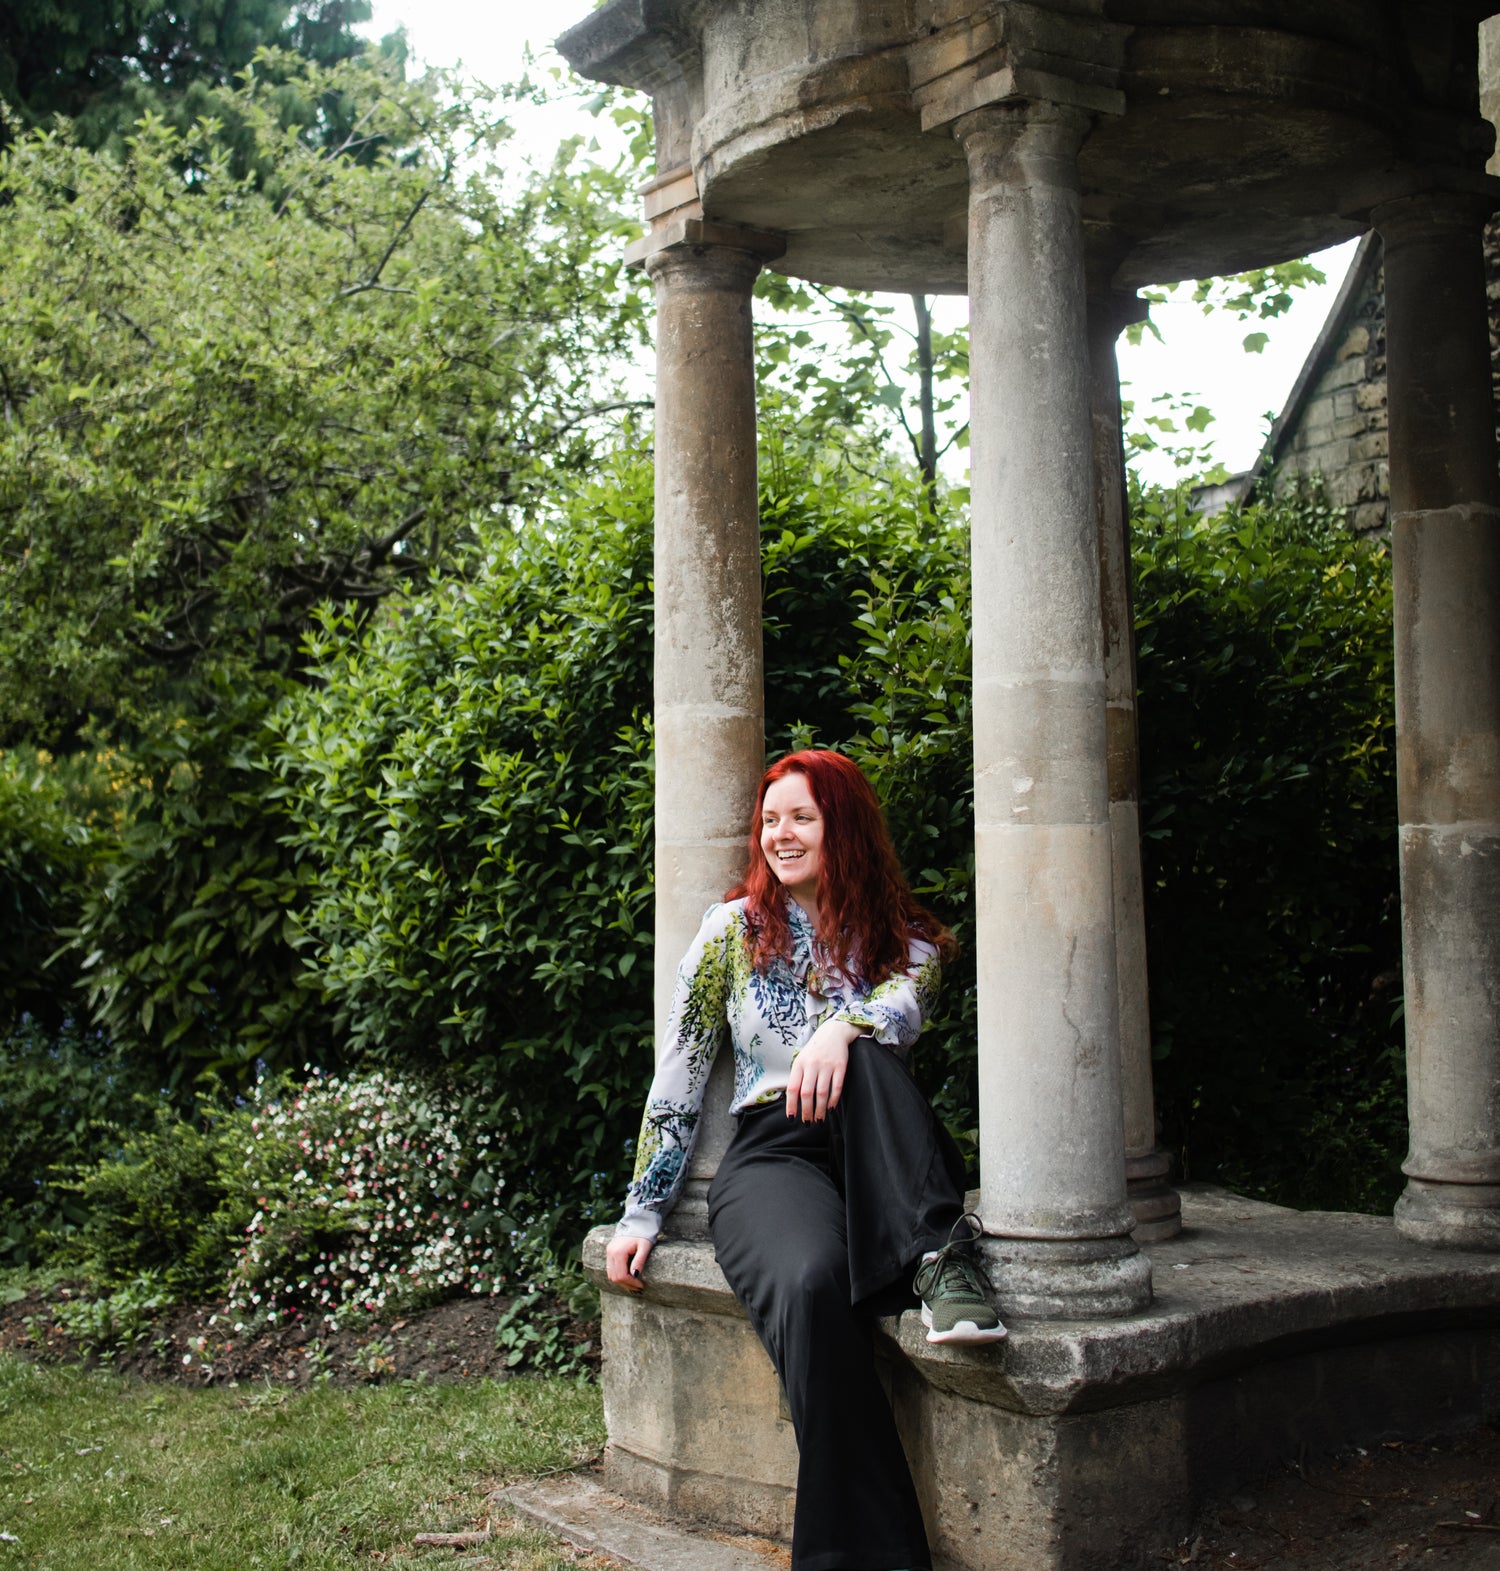 A woman sitting in front of green foliage on a stone column structure.  